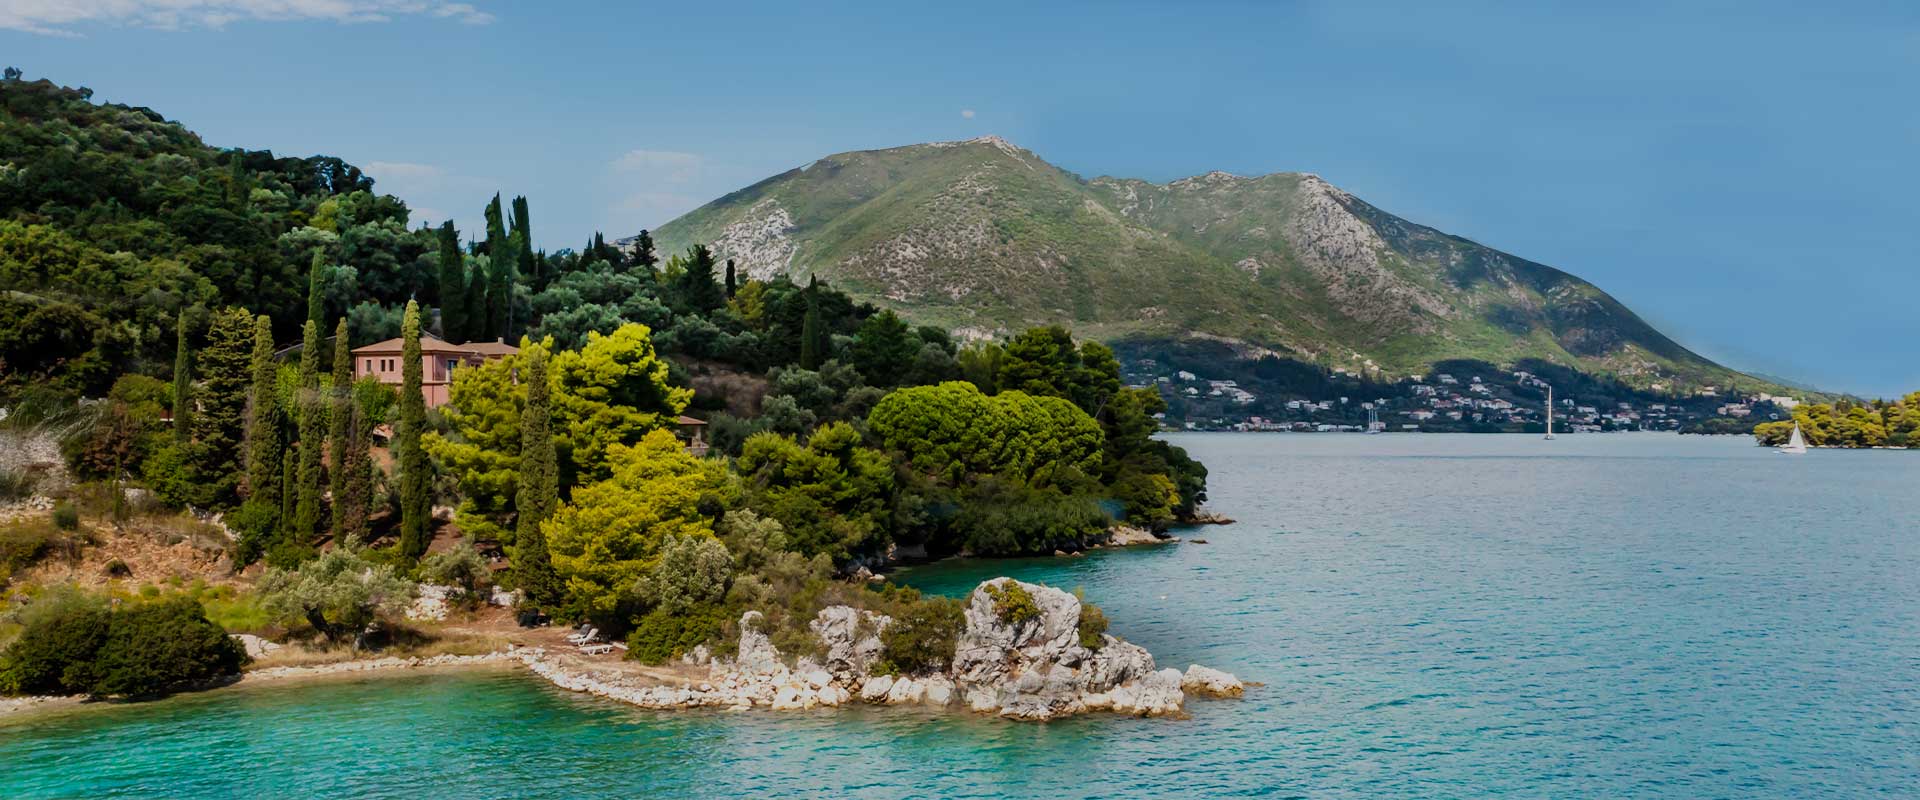 Explore Stunning Properties for Sale in Lefkada - Your Dream Home Awaits!